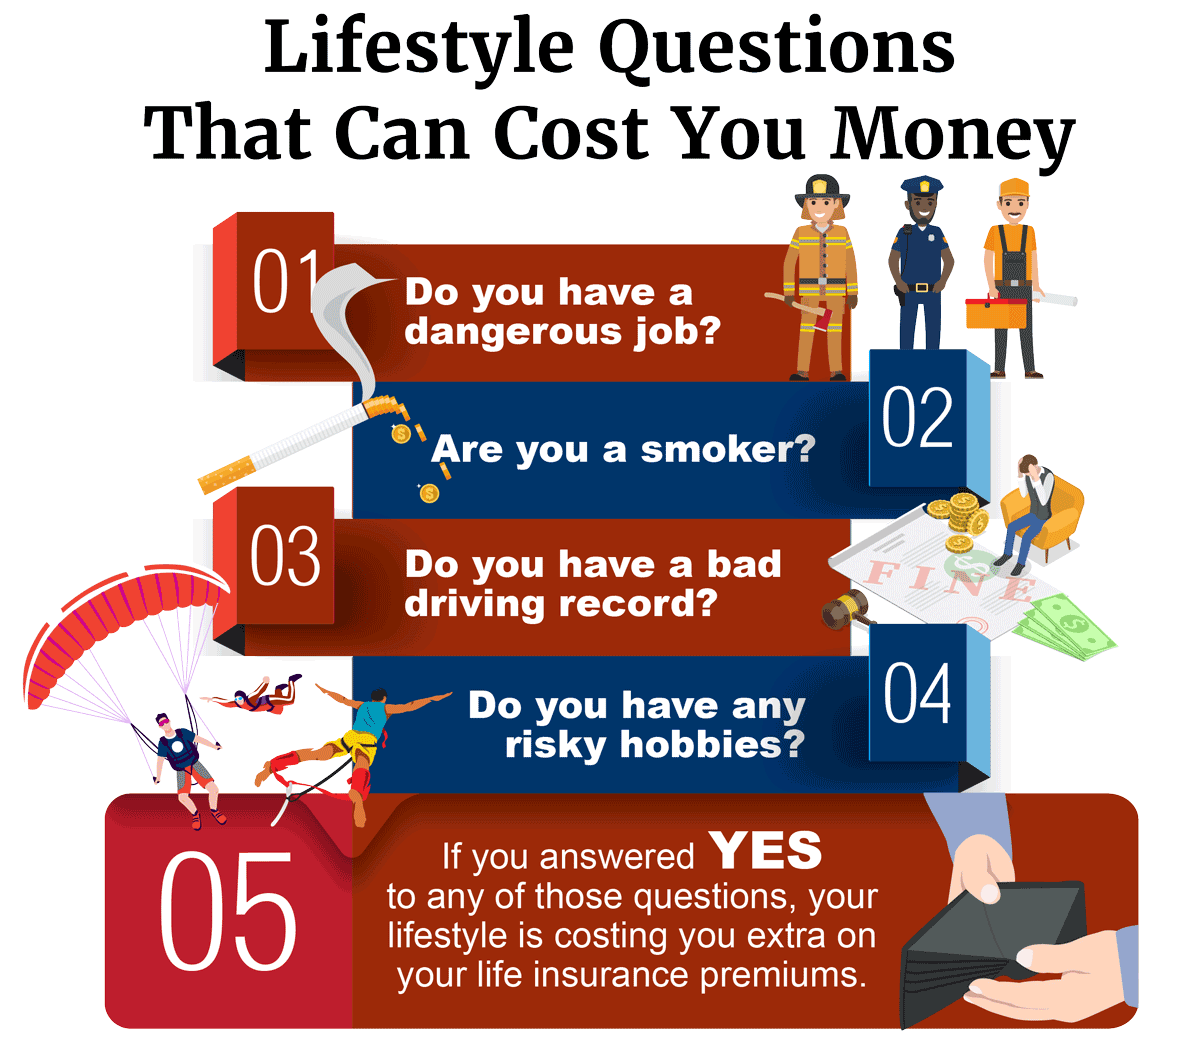 Lifestyle Questions That Can Cost You Money Infographic